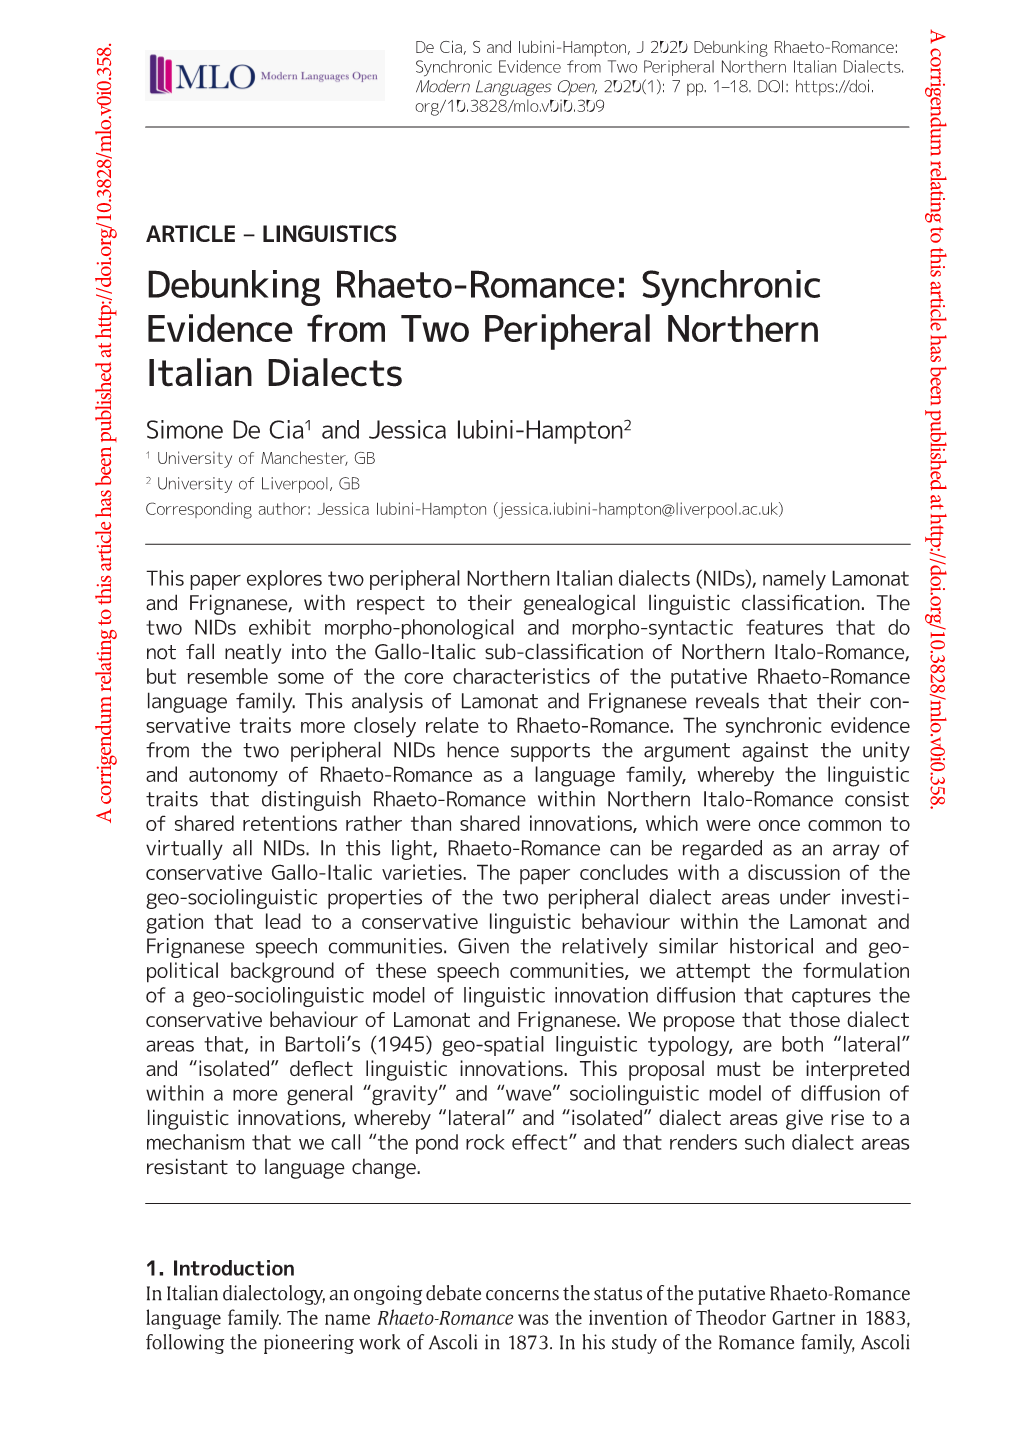 Debunking Rhaeto-Romance: Synchronic Evidence from Two Peripheral Northern Italian Dialects